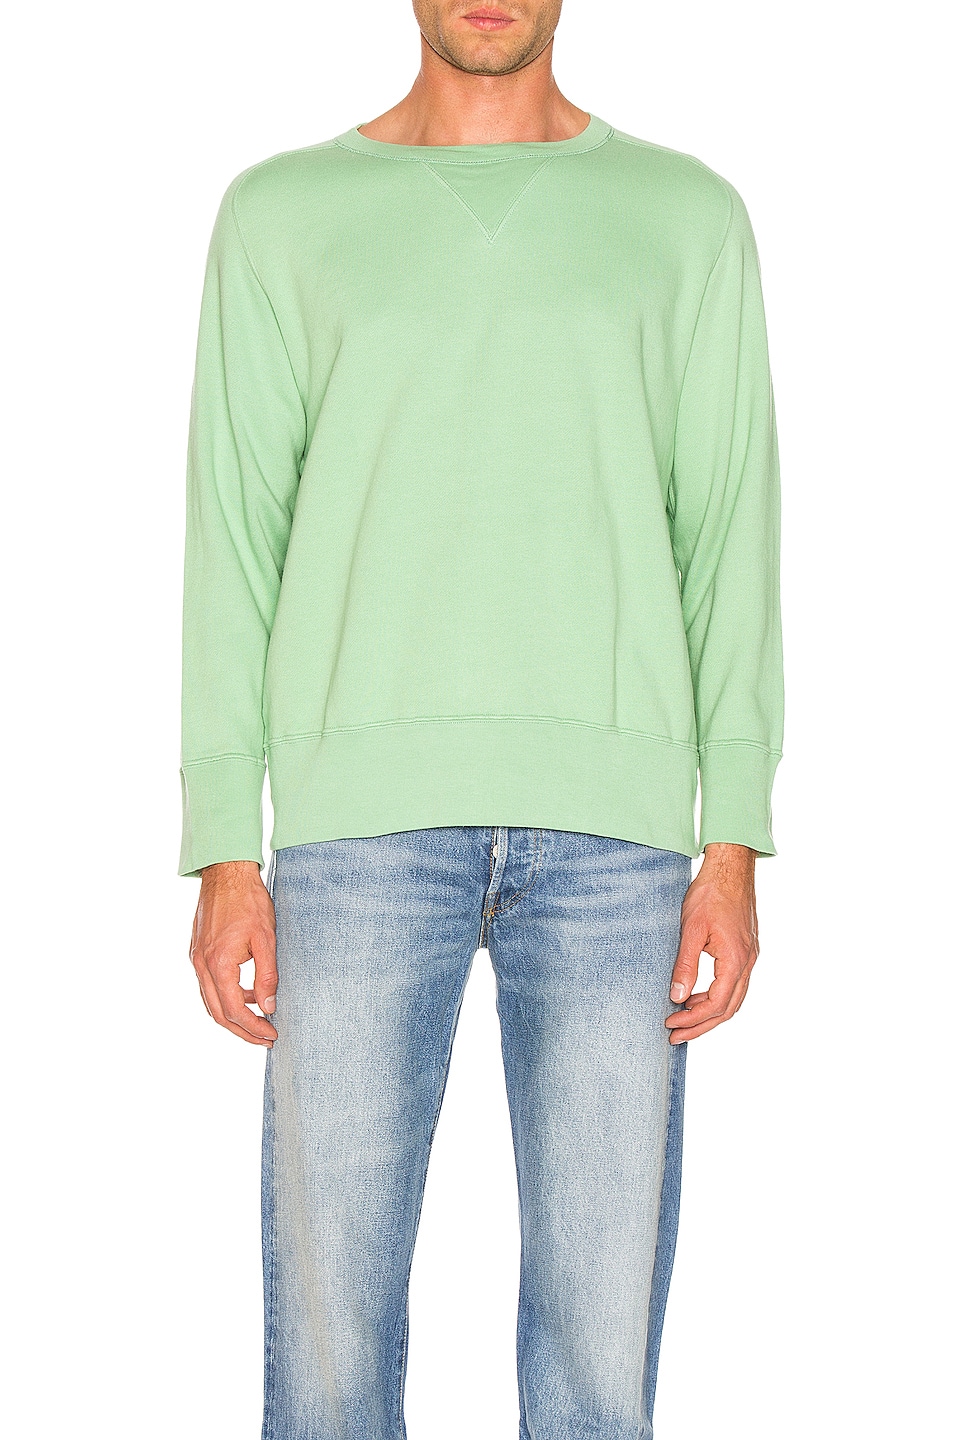 Image 1 of LEVI'S Vintage Clothing Bay Meadows Sweatshirt in Mint Green